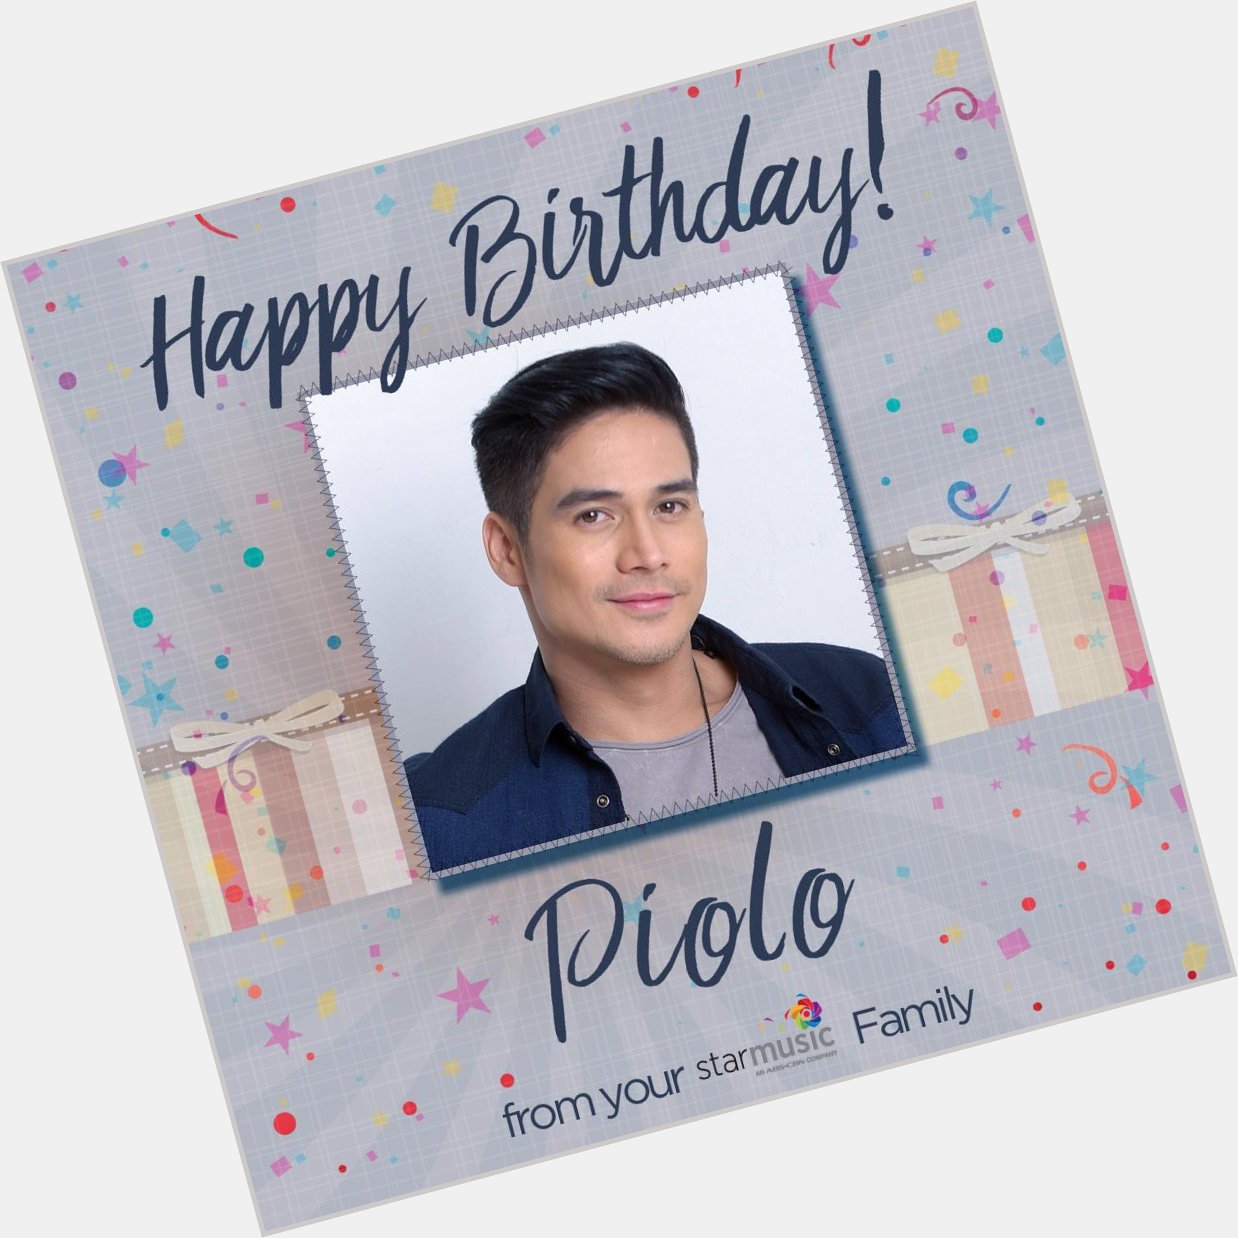 Happy birthday Piolo Pascual! Love, your Star Music family!    